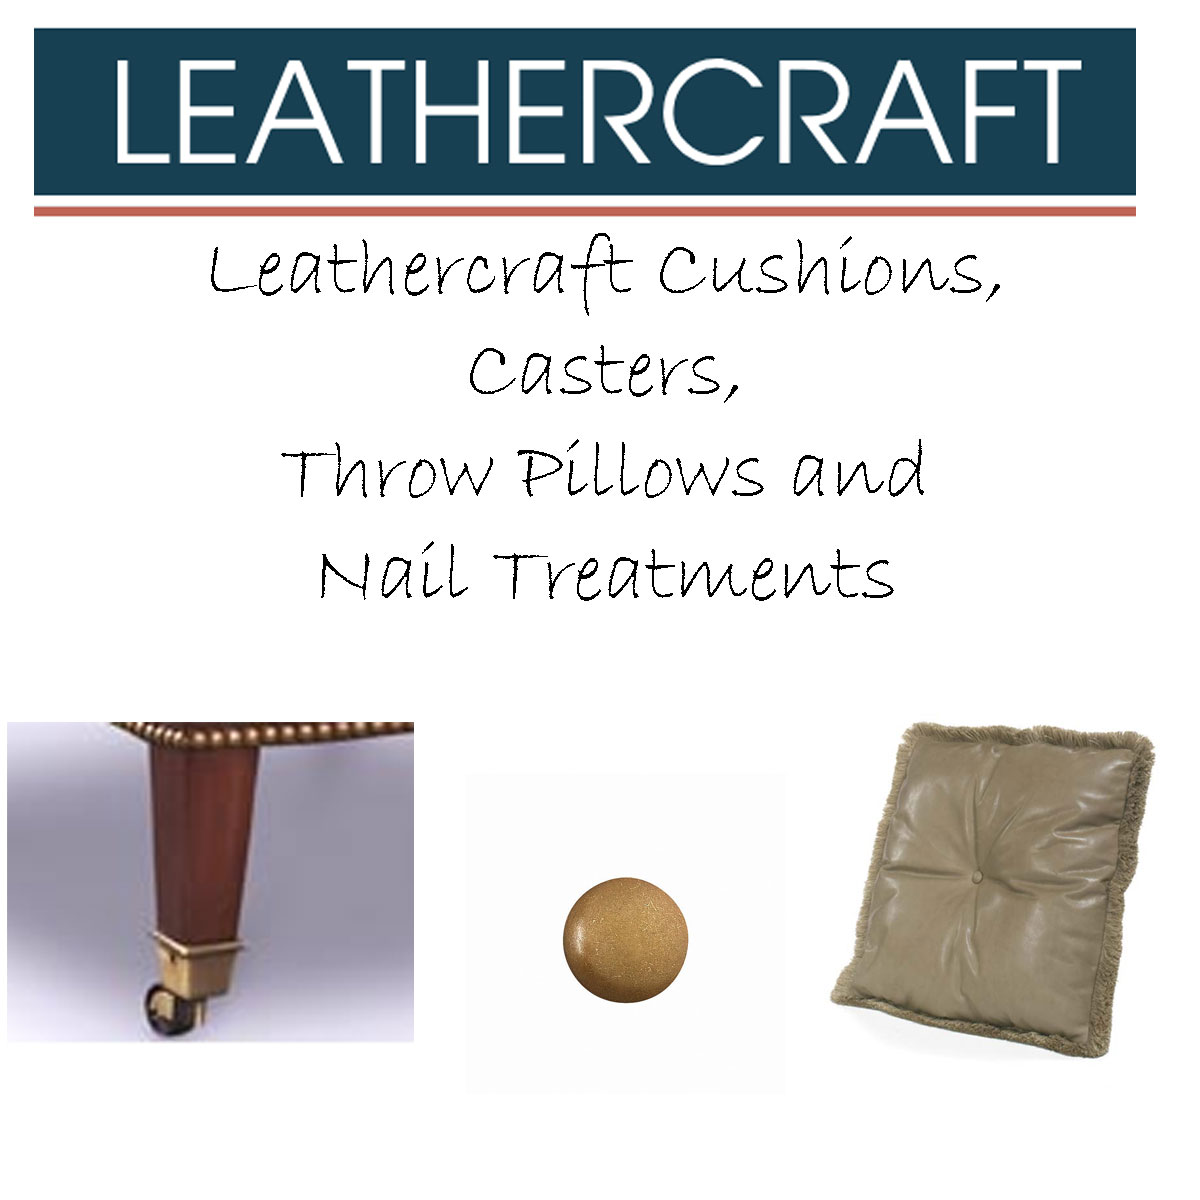  Leathercraft Cushions, Casters, Throw Pillows and Nail Treatments 